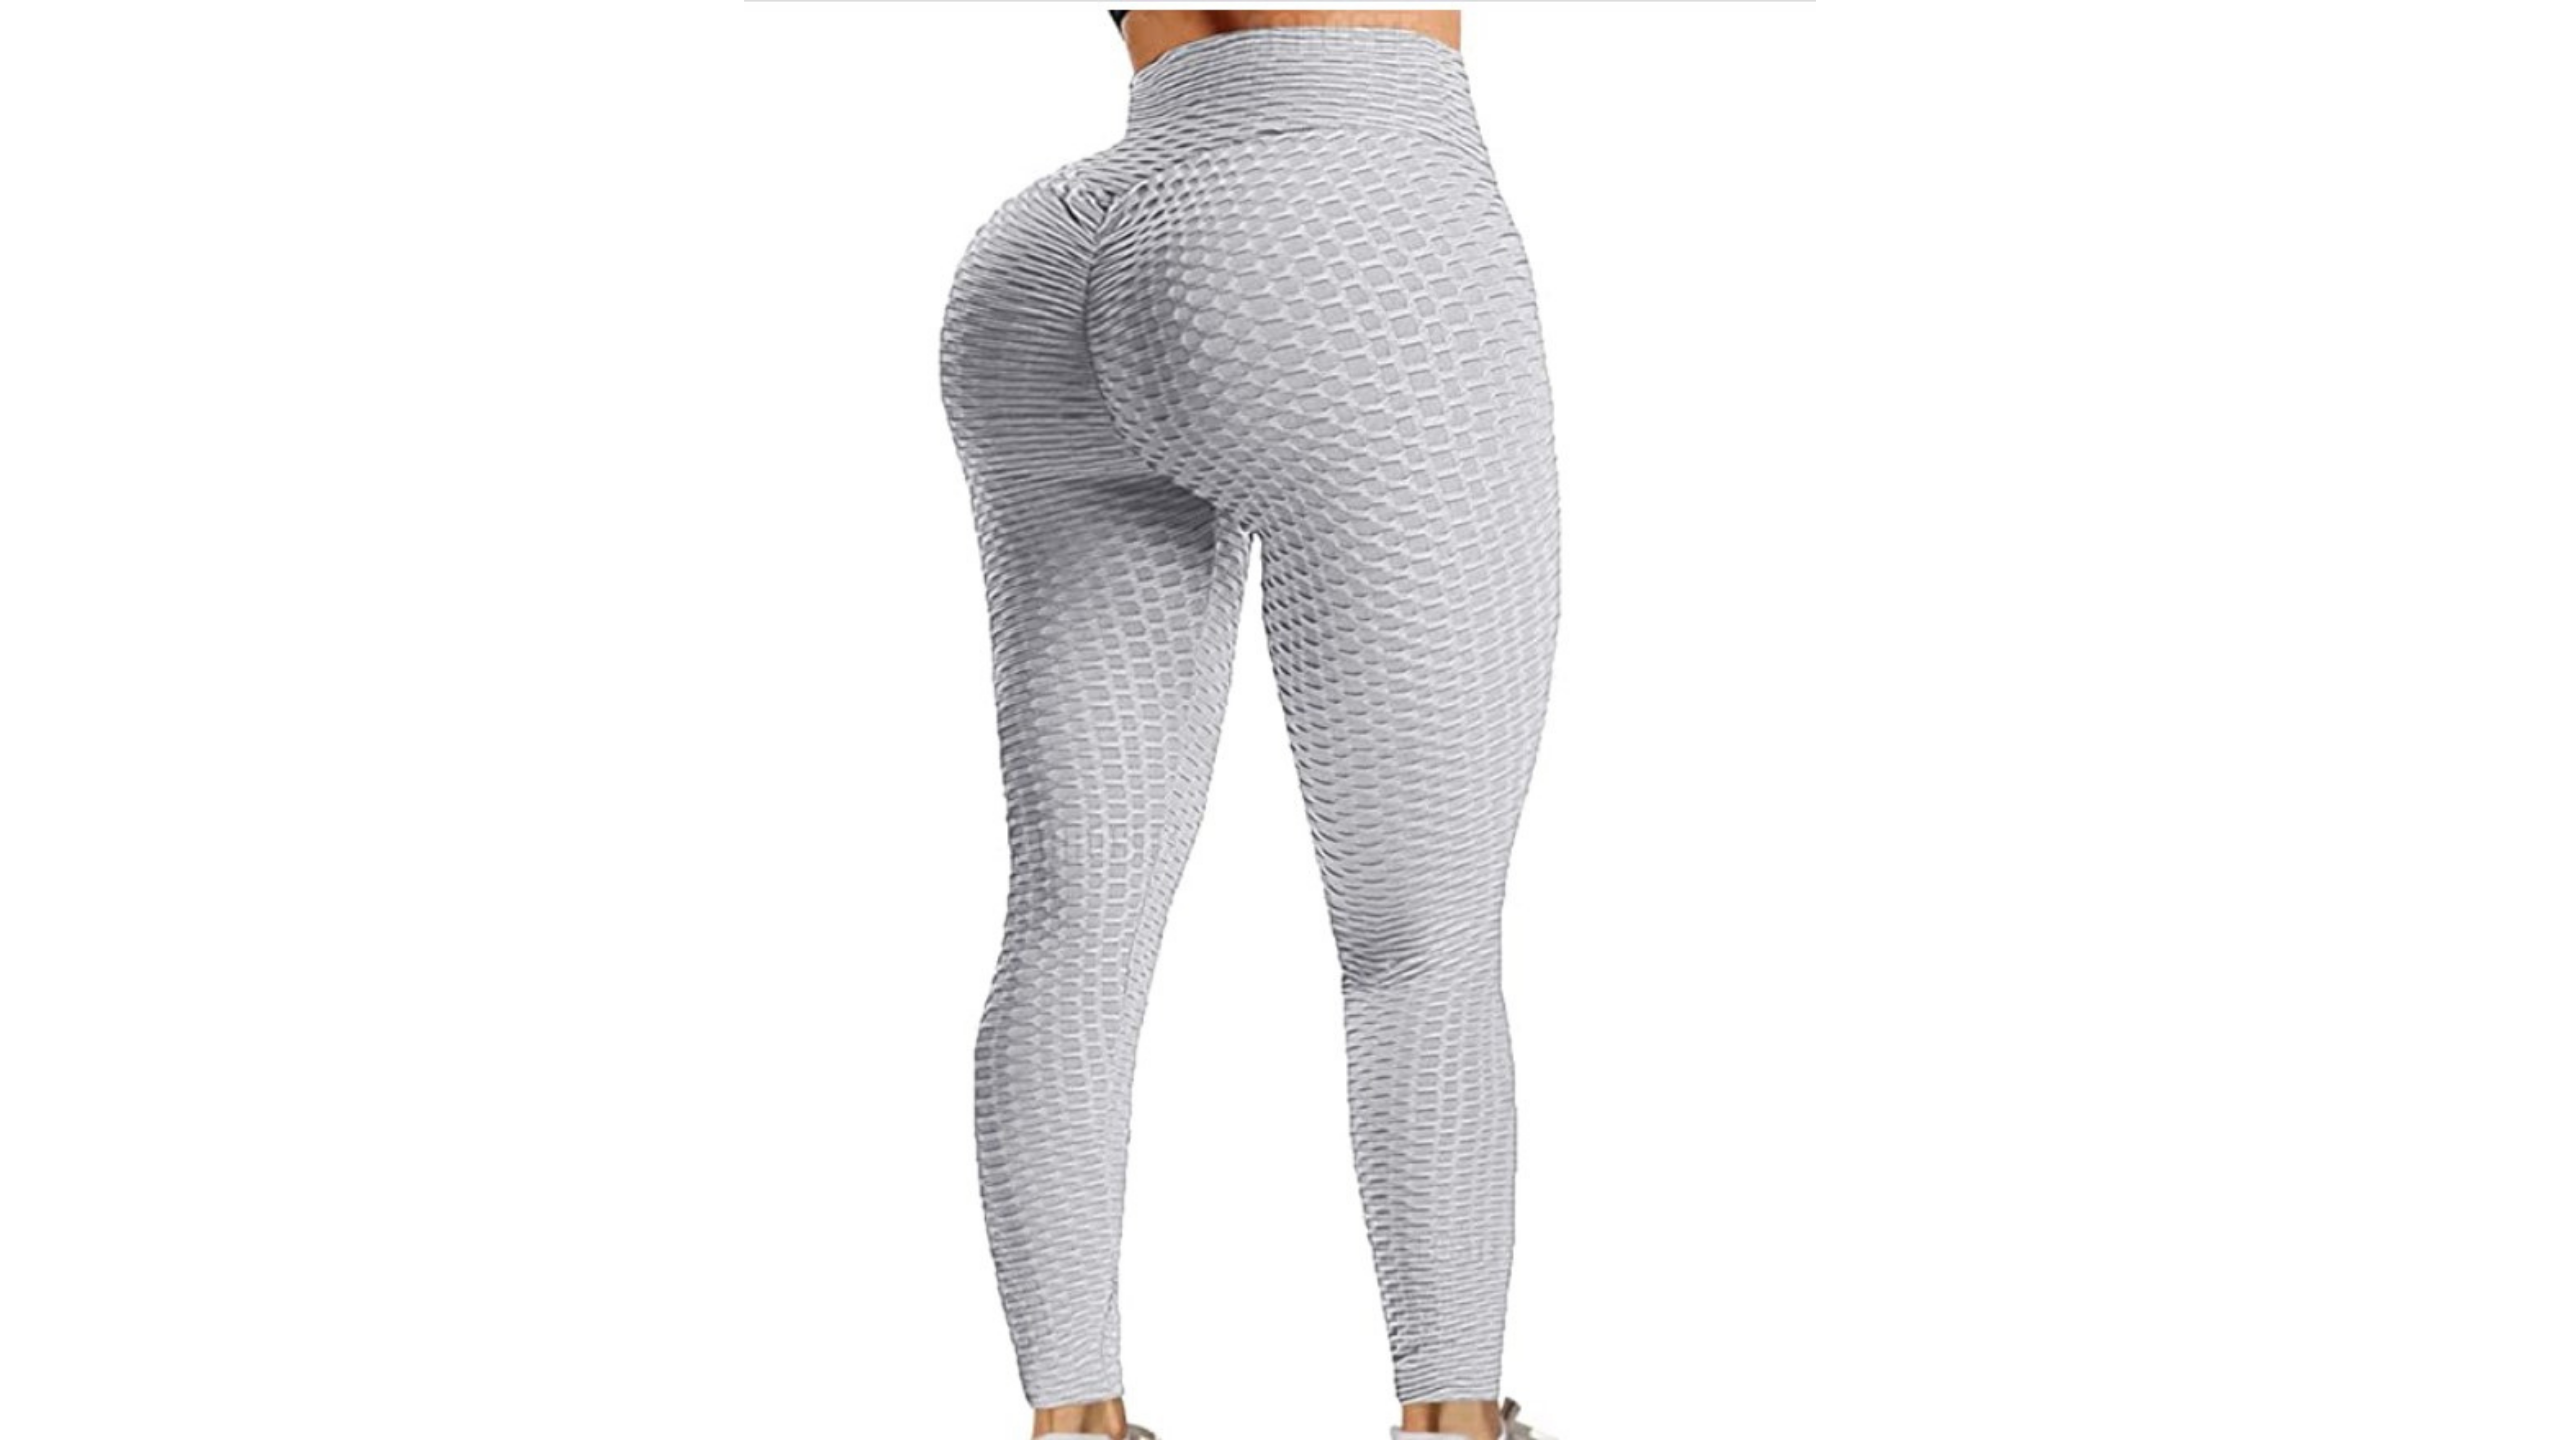 Buy Rulafant TIK Tok Butt Scrunch Leggings for Women High Waisted Booty  Workout Gym Yoga Pants Ruched Butt Lift Textured Tights Black at Amazonin